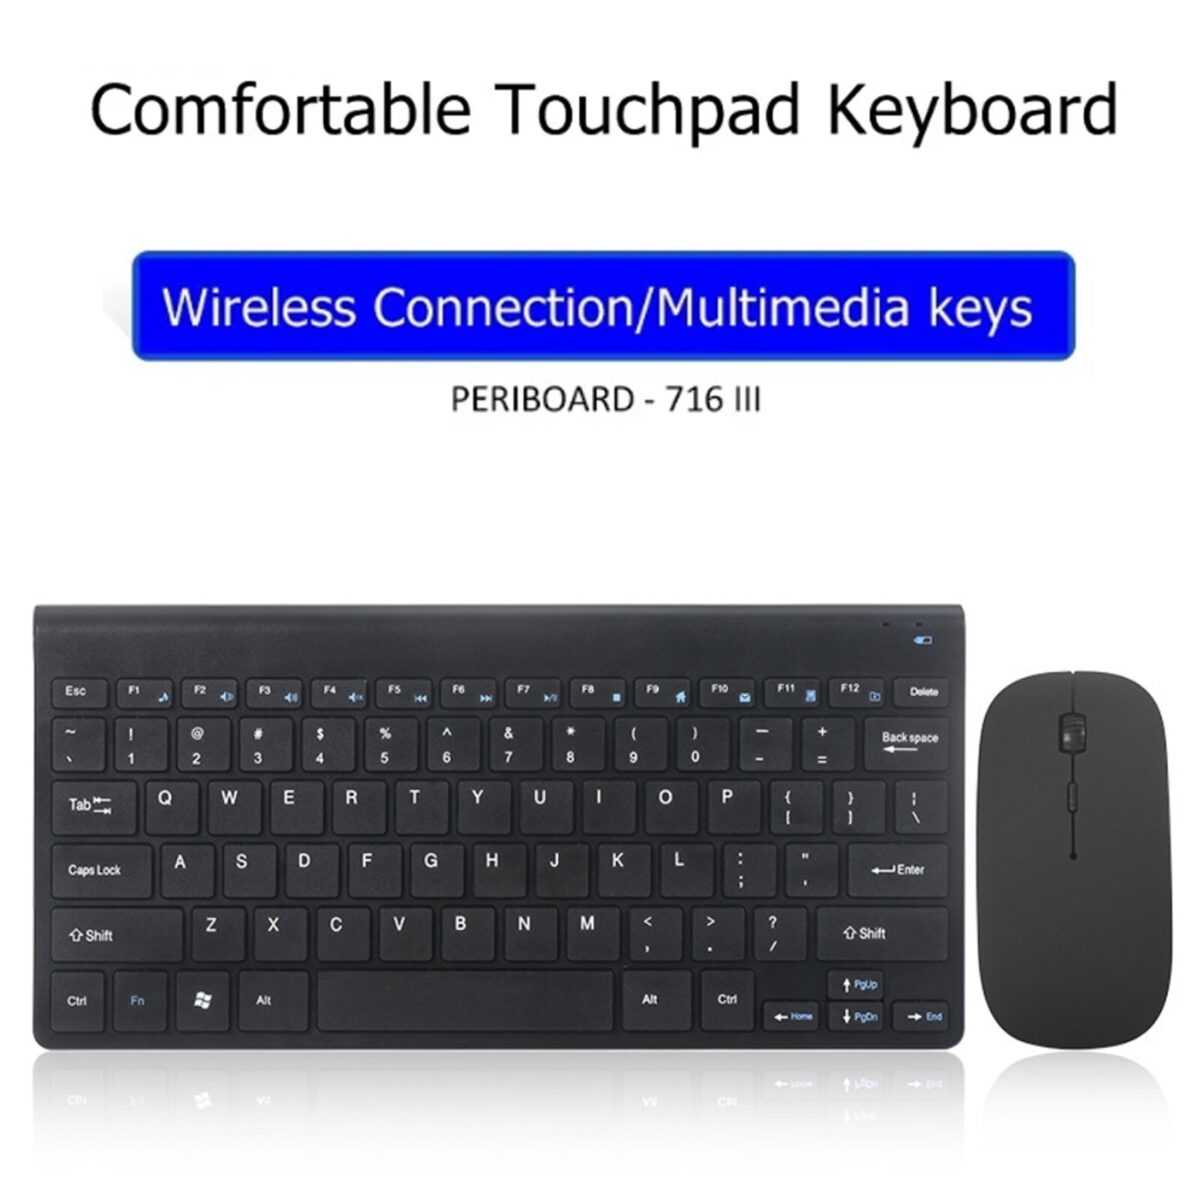 Rechargeable Wireless Keyboard Mouse 2 4G Full Size Thin Ergonomic And Compact Design For Laptop PC Rechargeable Wireless Keyboard Mouse 2.4G